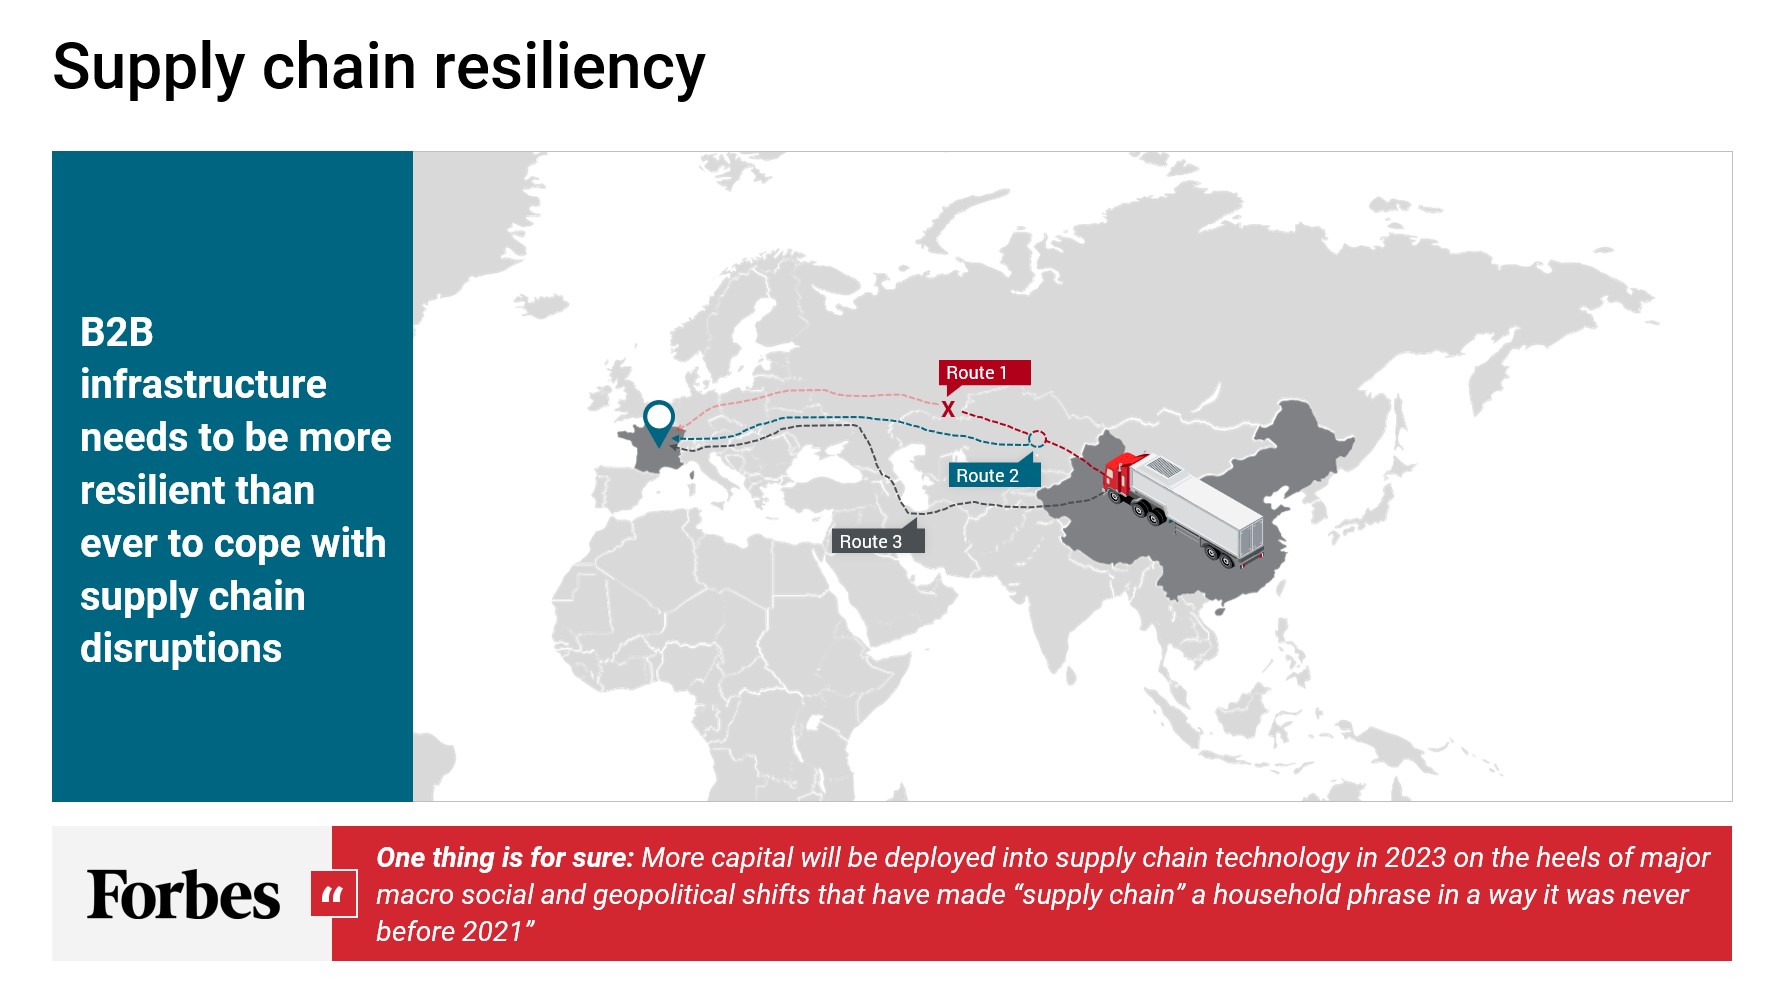 3. Maintaining supply chain resilience